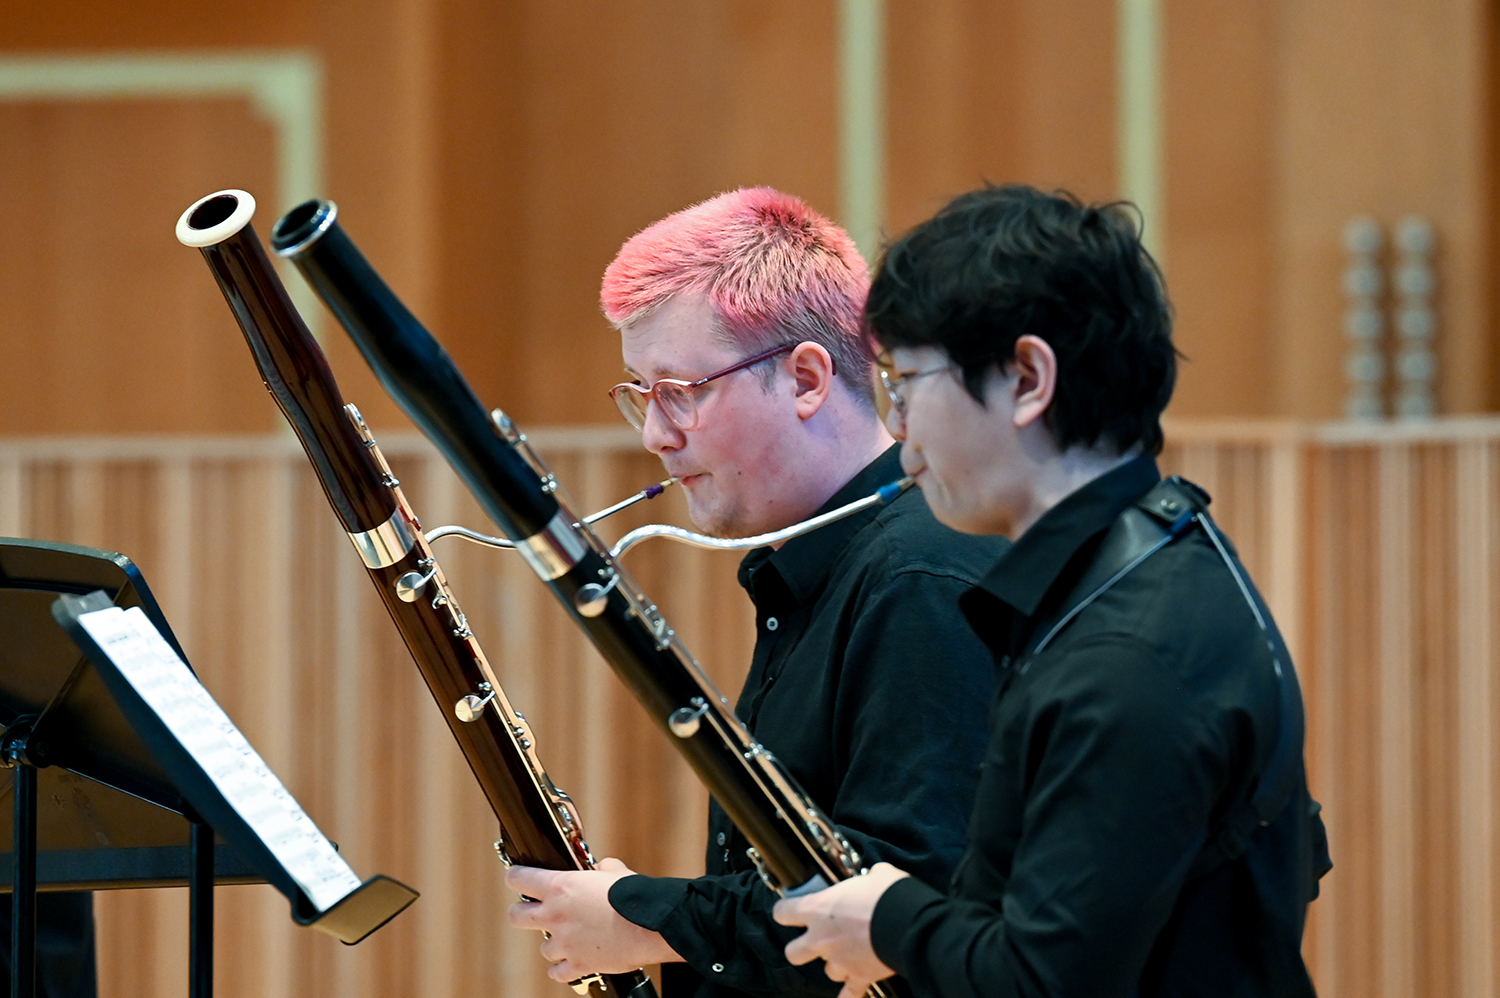 Two students, one with pink hair one with black hair, performing on bassoons in the Amaryllis Fleming Concert Hall